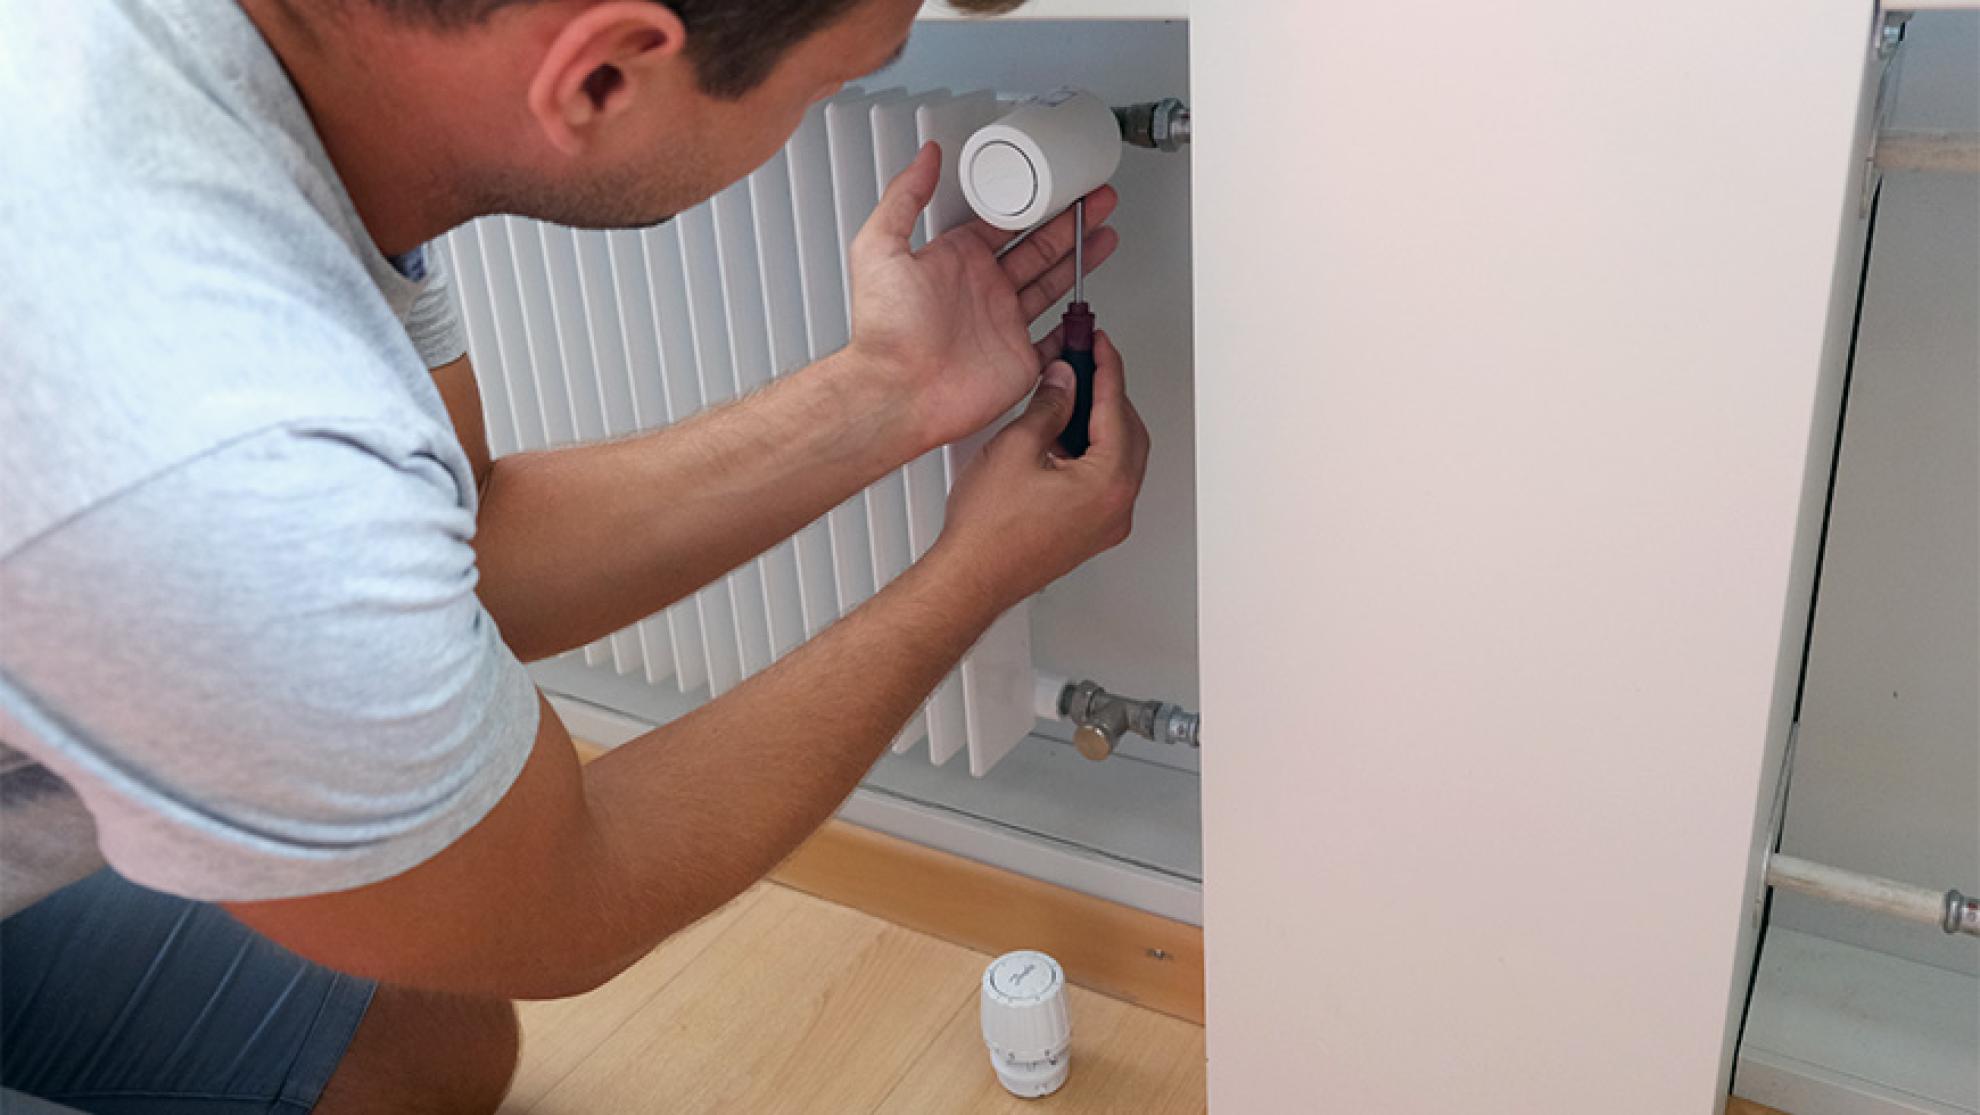 Replacing conventional radiator thermostat sensors with smart thermostats to make use of the self-learning algorithm from viboo. Image: Empa